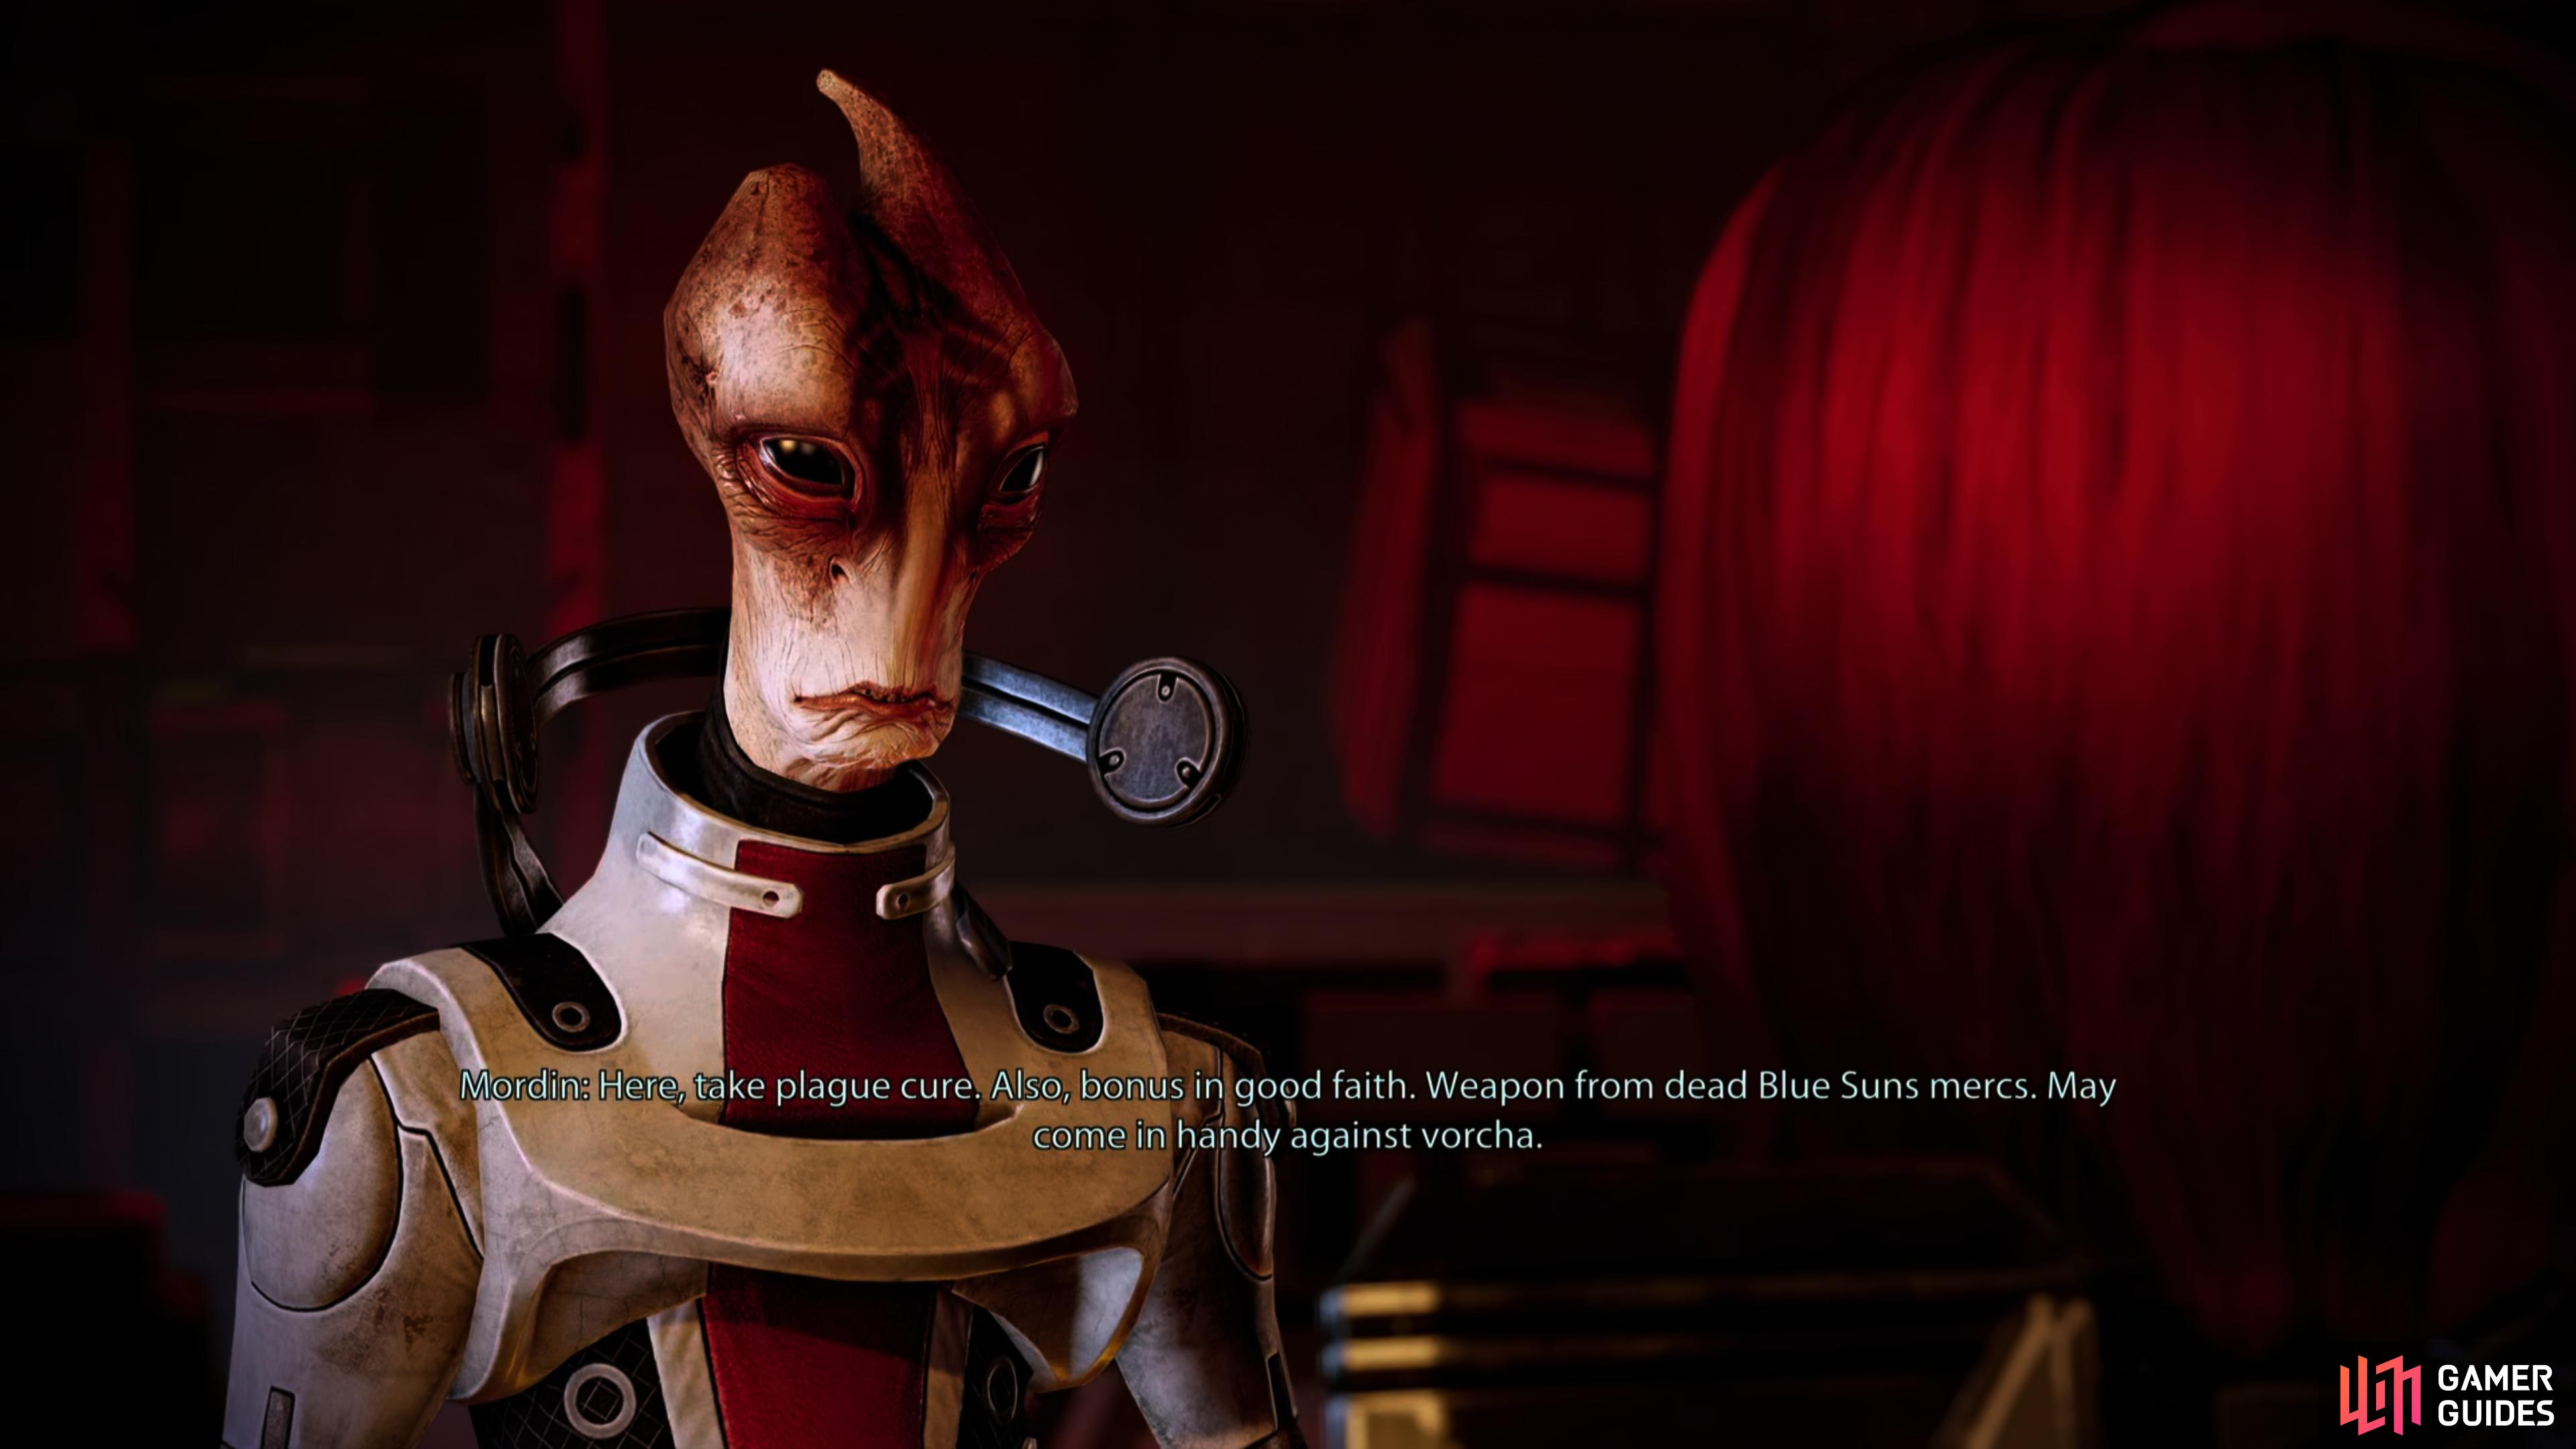 then talk to Mordin, who won't join you without conditions… but he does give you a new handgun.